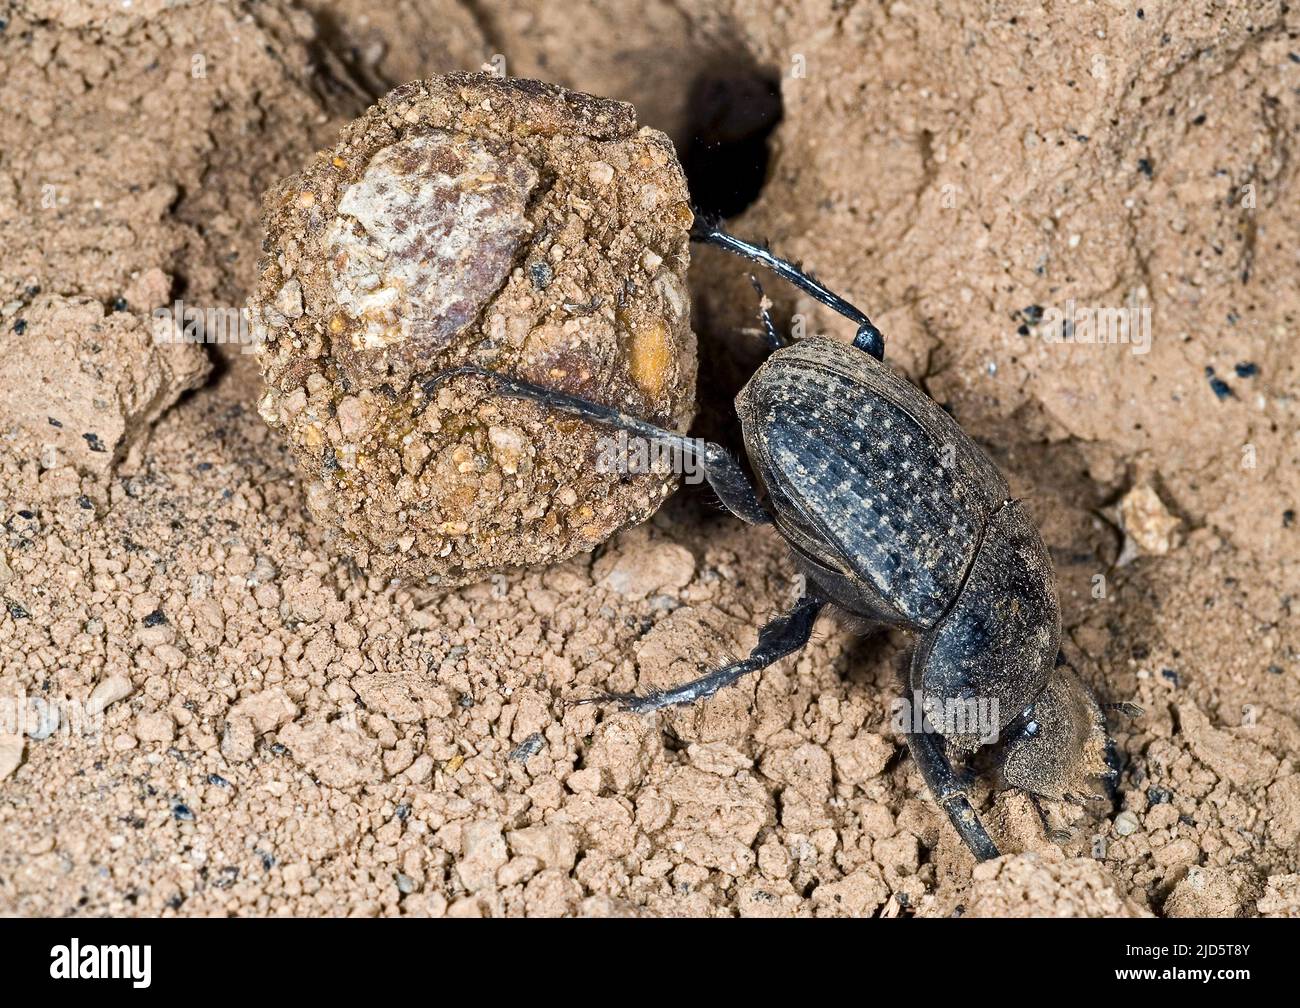 Dung beetle rolling dung. Possibly Scarabaeus sp. Tanzania. Stock Photo